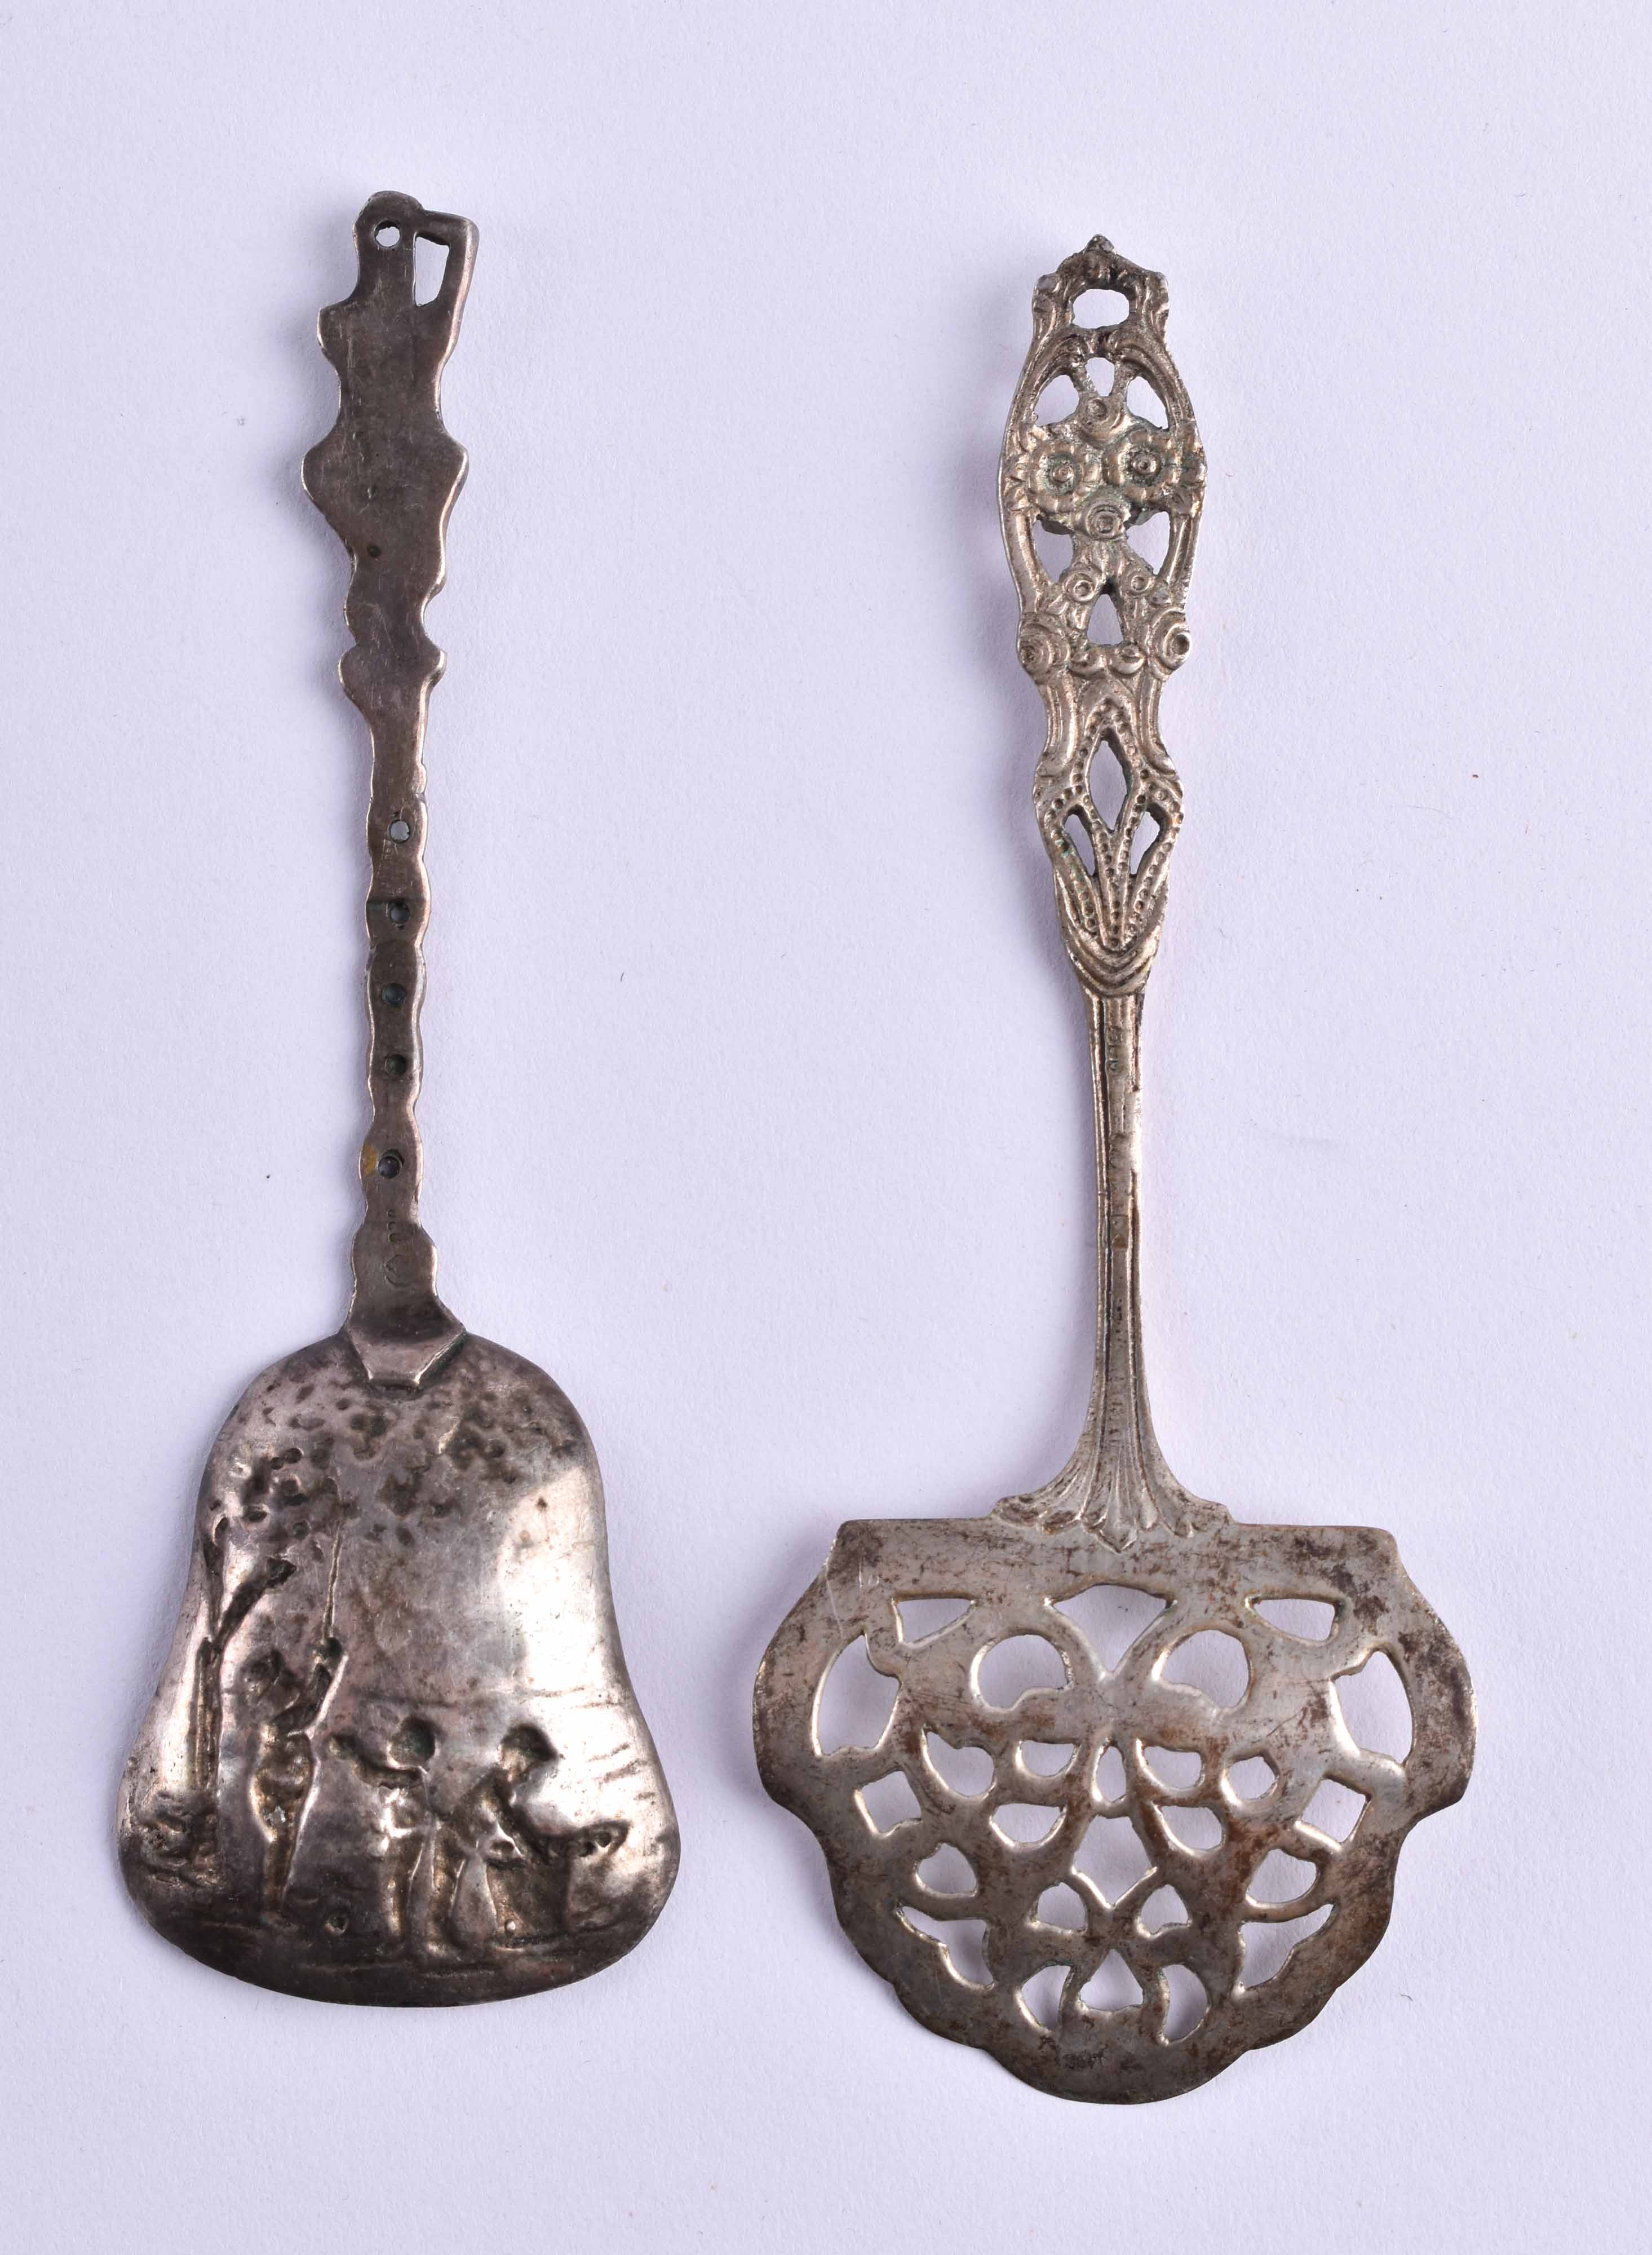 two sugar scoops around 1900 - Image 2 of 3